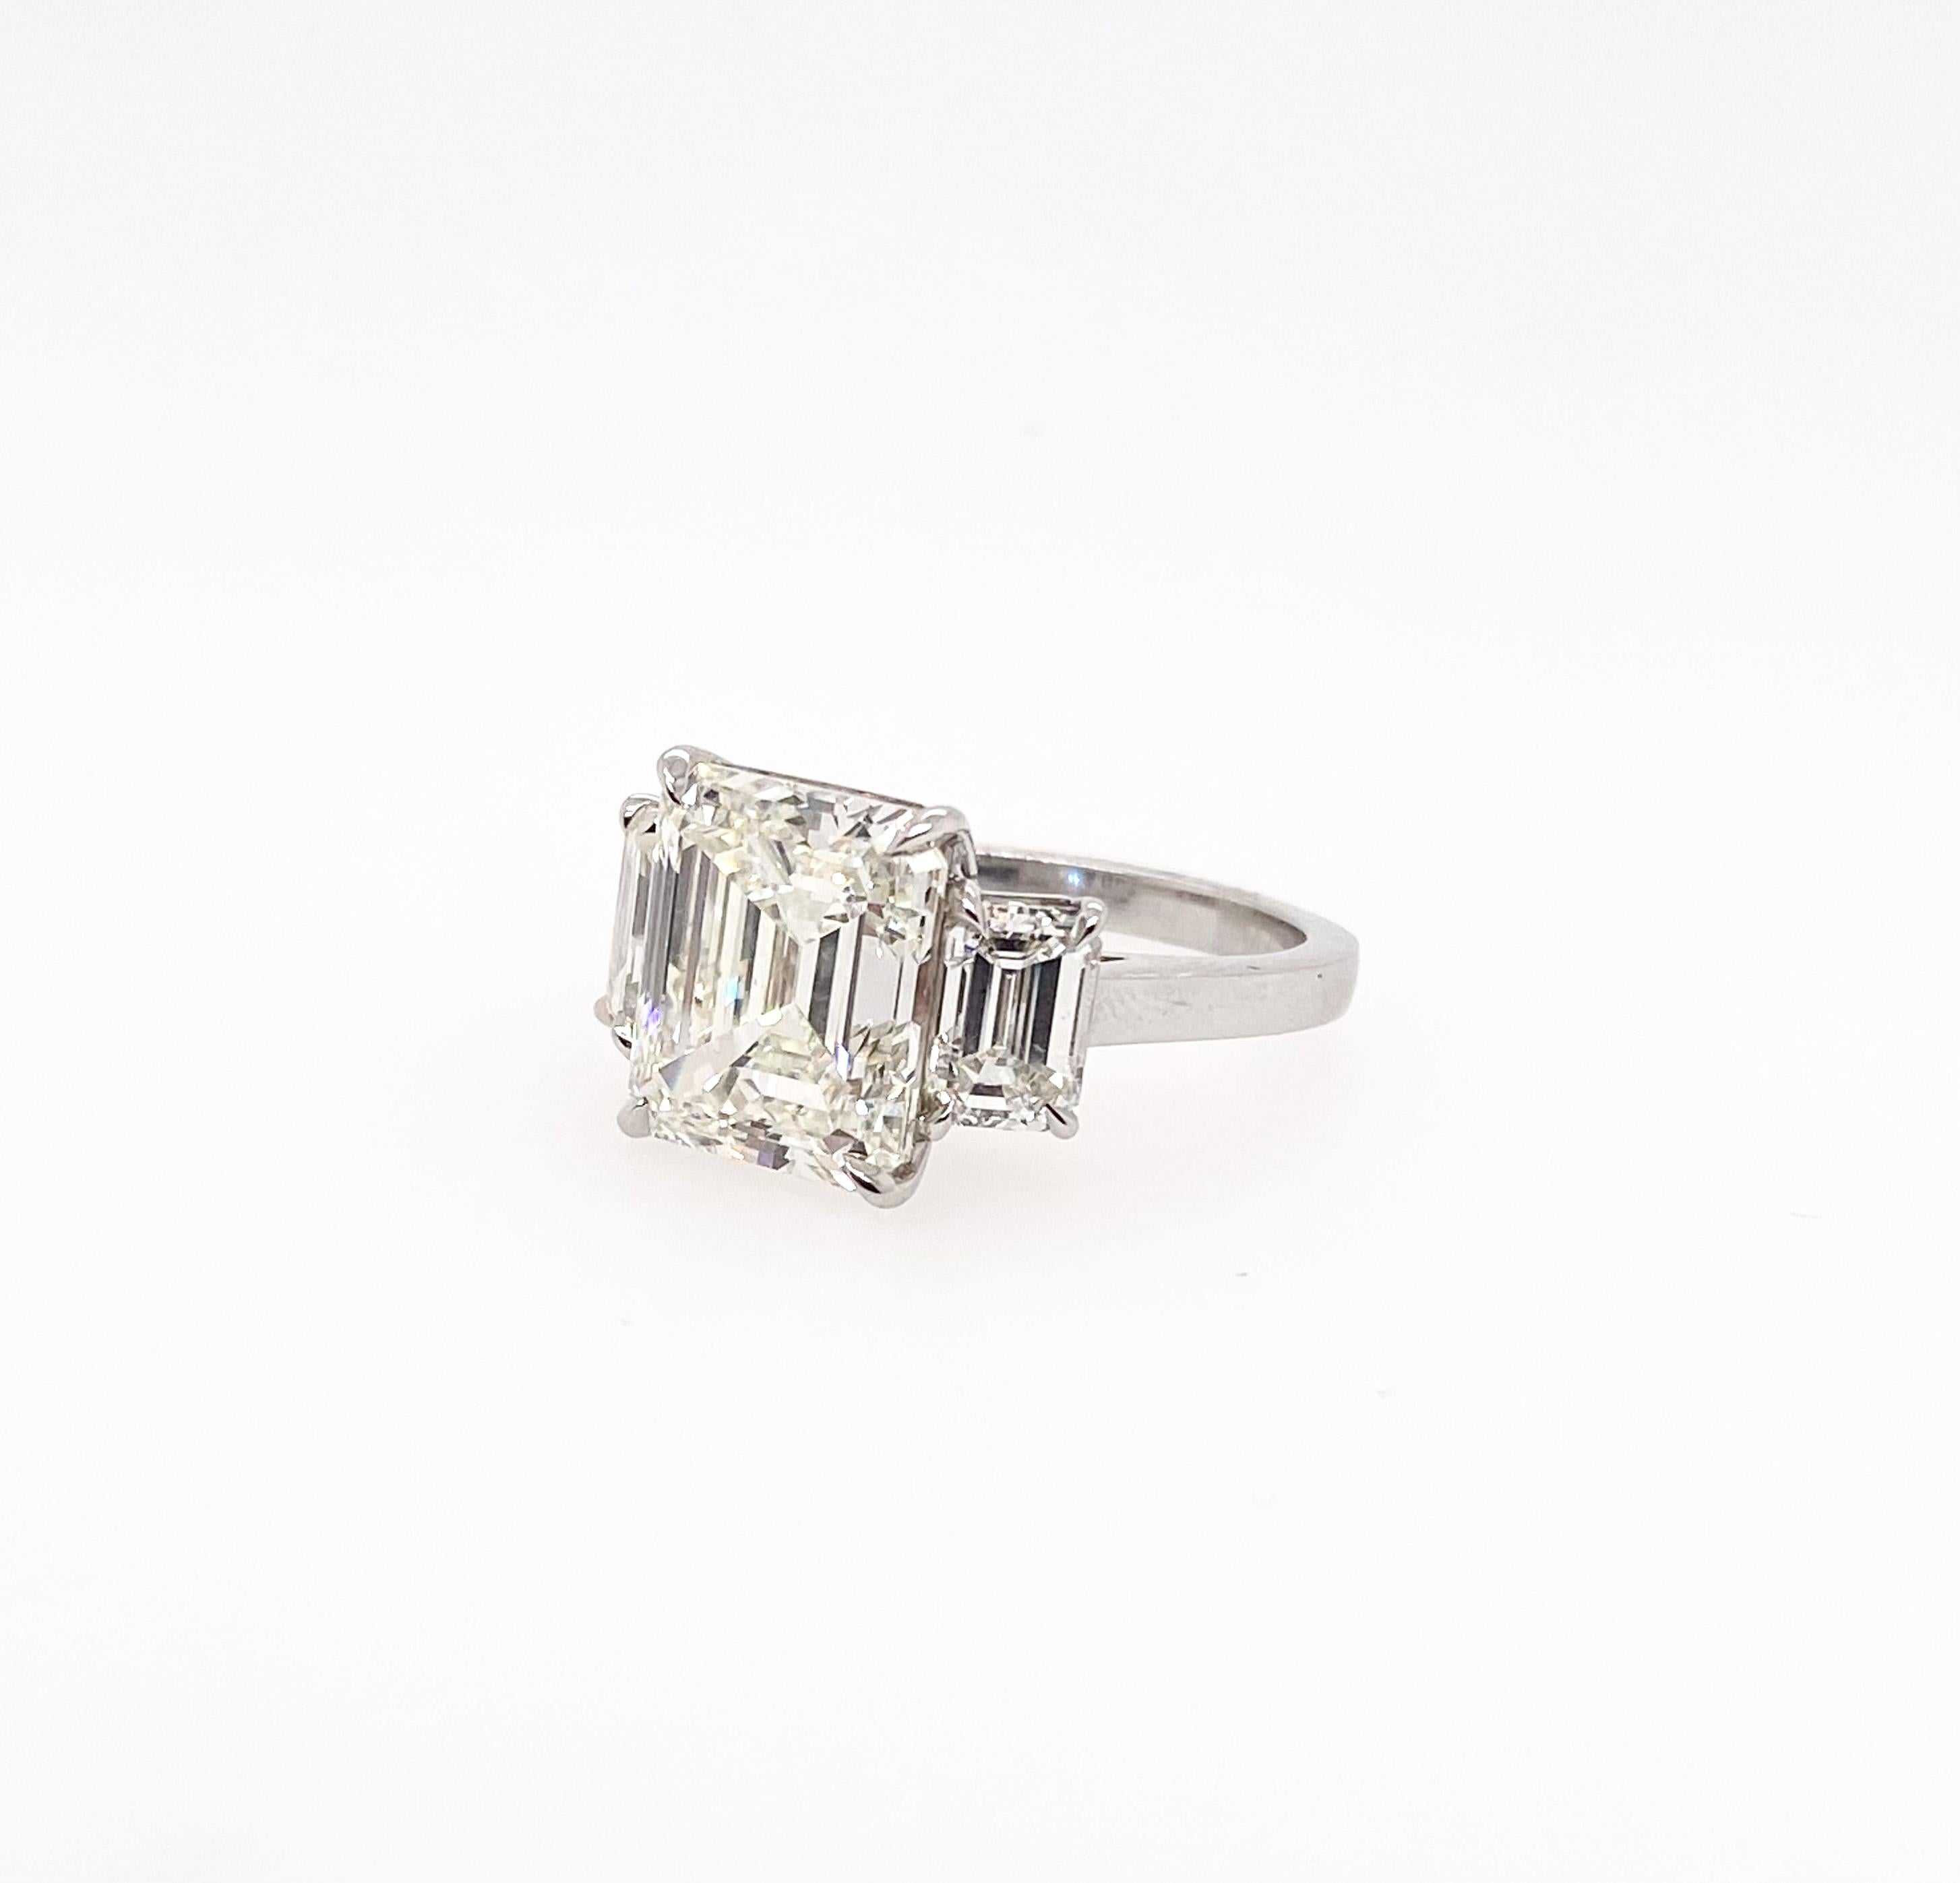 This three-stone ring is fully set with the certified Emerald cut diamonds. The 5.82carat with IGI Certificate emerald cut diamond in the center is perfectly accentuated with two beautifully certified emerald cut diamonds mounted on the side